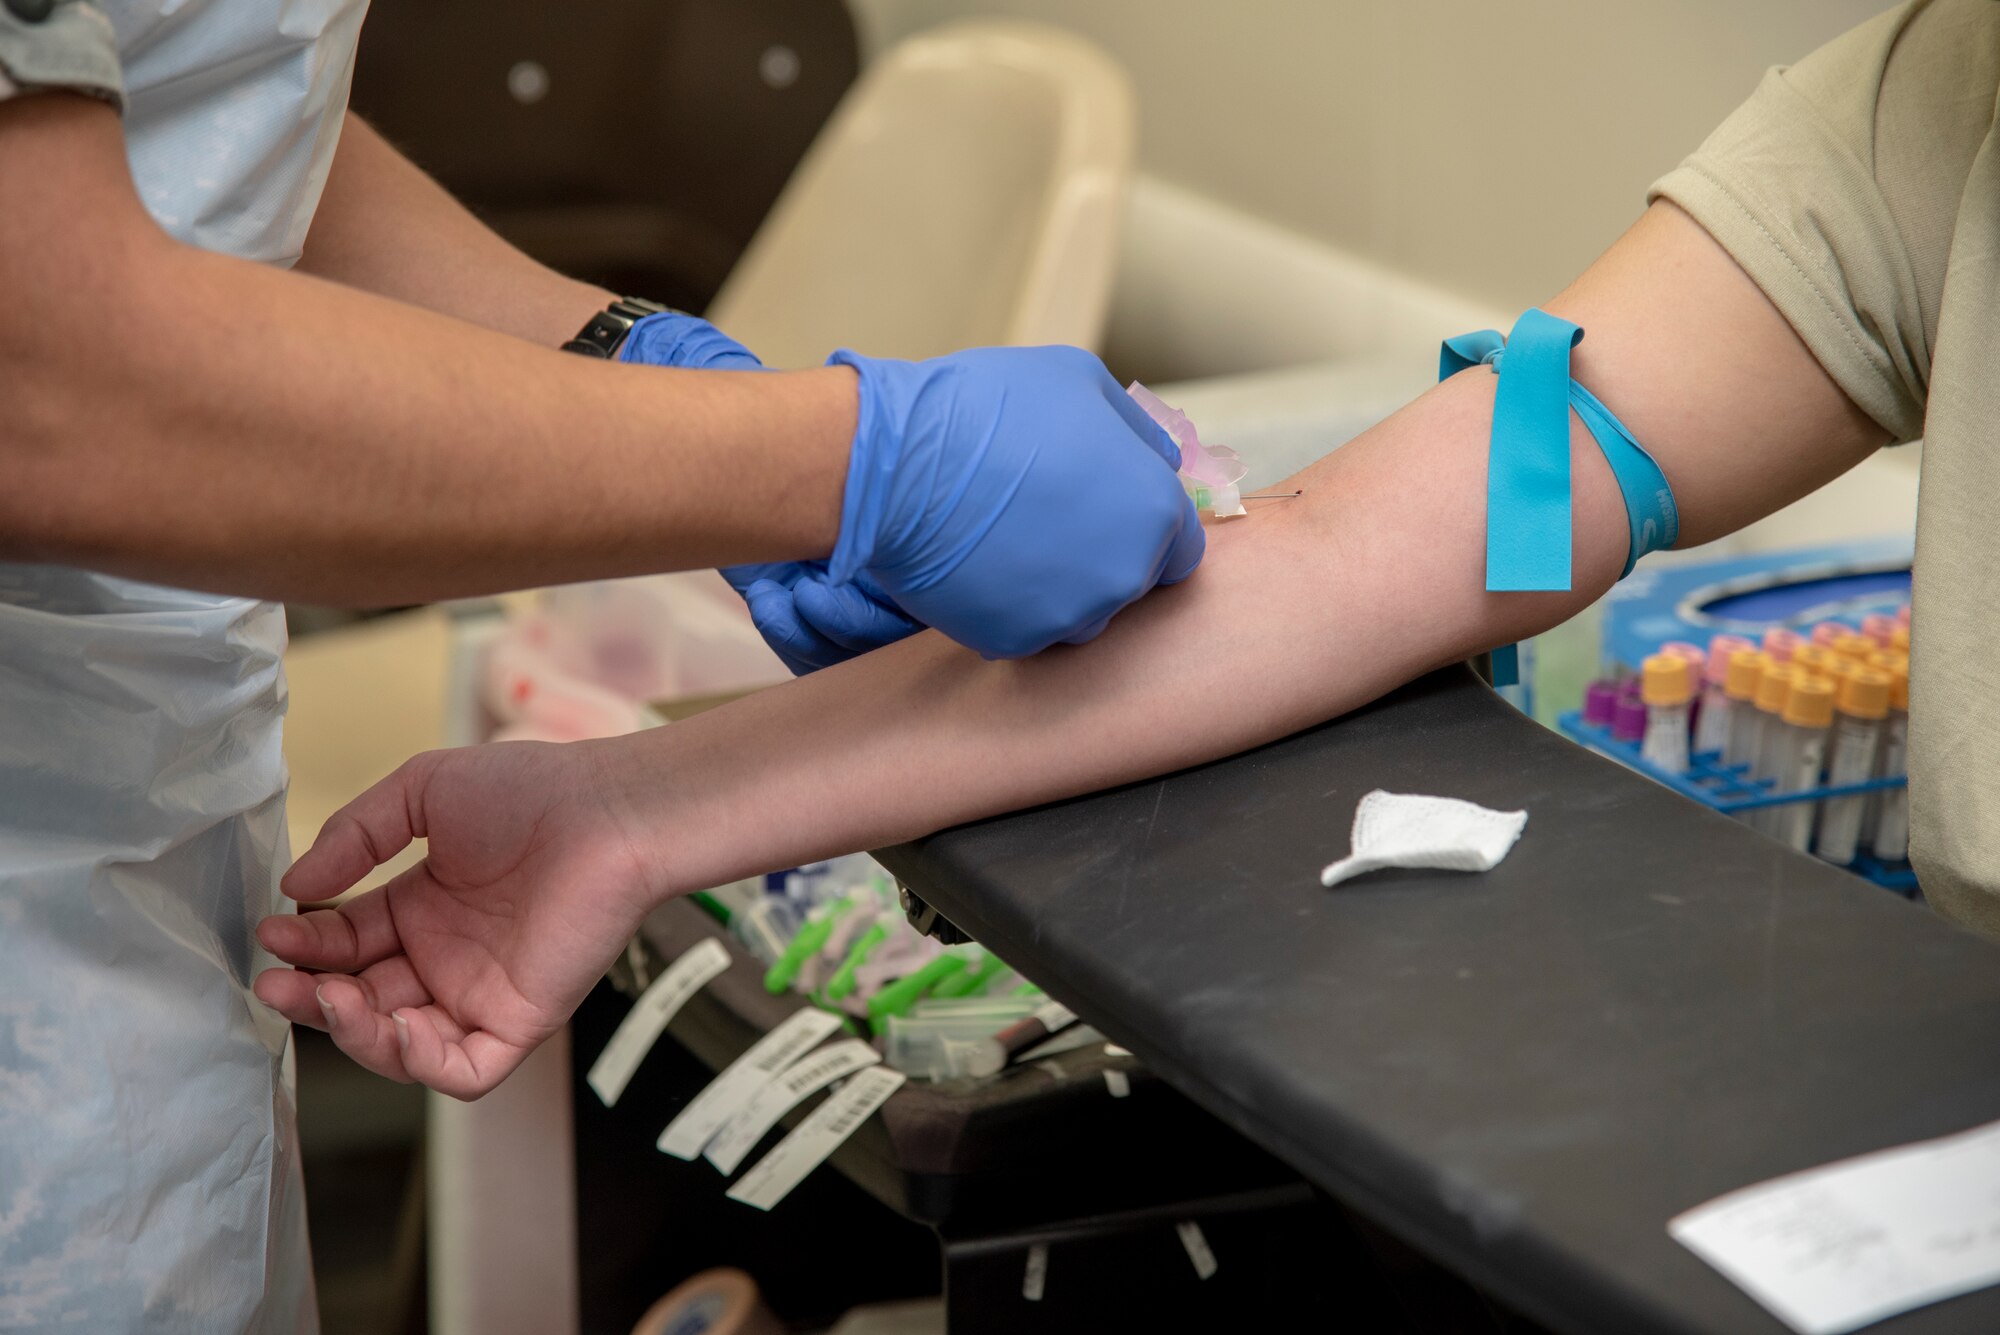 An Air Force Basic Military Trainee at Lackland Air Force Base, Texas, gets blood drawn for lab tests and DNA cards November 8, 2018. In 1992, the Armed Forces Medical Examiner System-The Armed Forces Repository of Specimen Samples was established to aid in the identification of remains and started with 10,000 collections at Fort Knox, Kentucky. (U.S. Air Force photo/Staff Sgt. Nicole Leidholm)